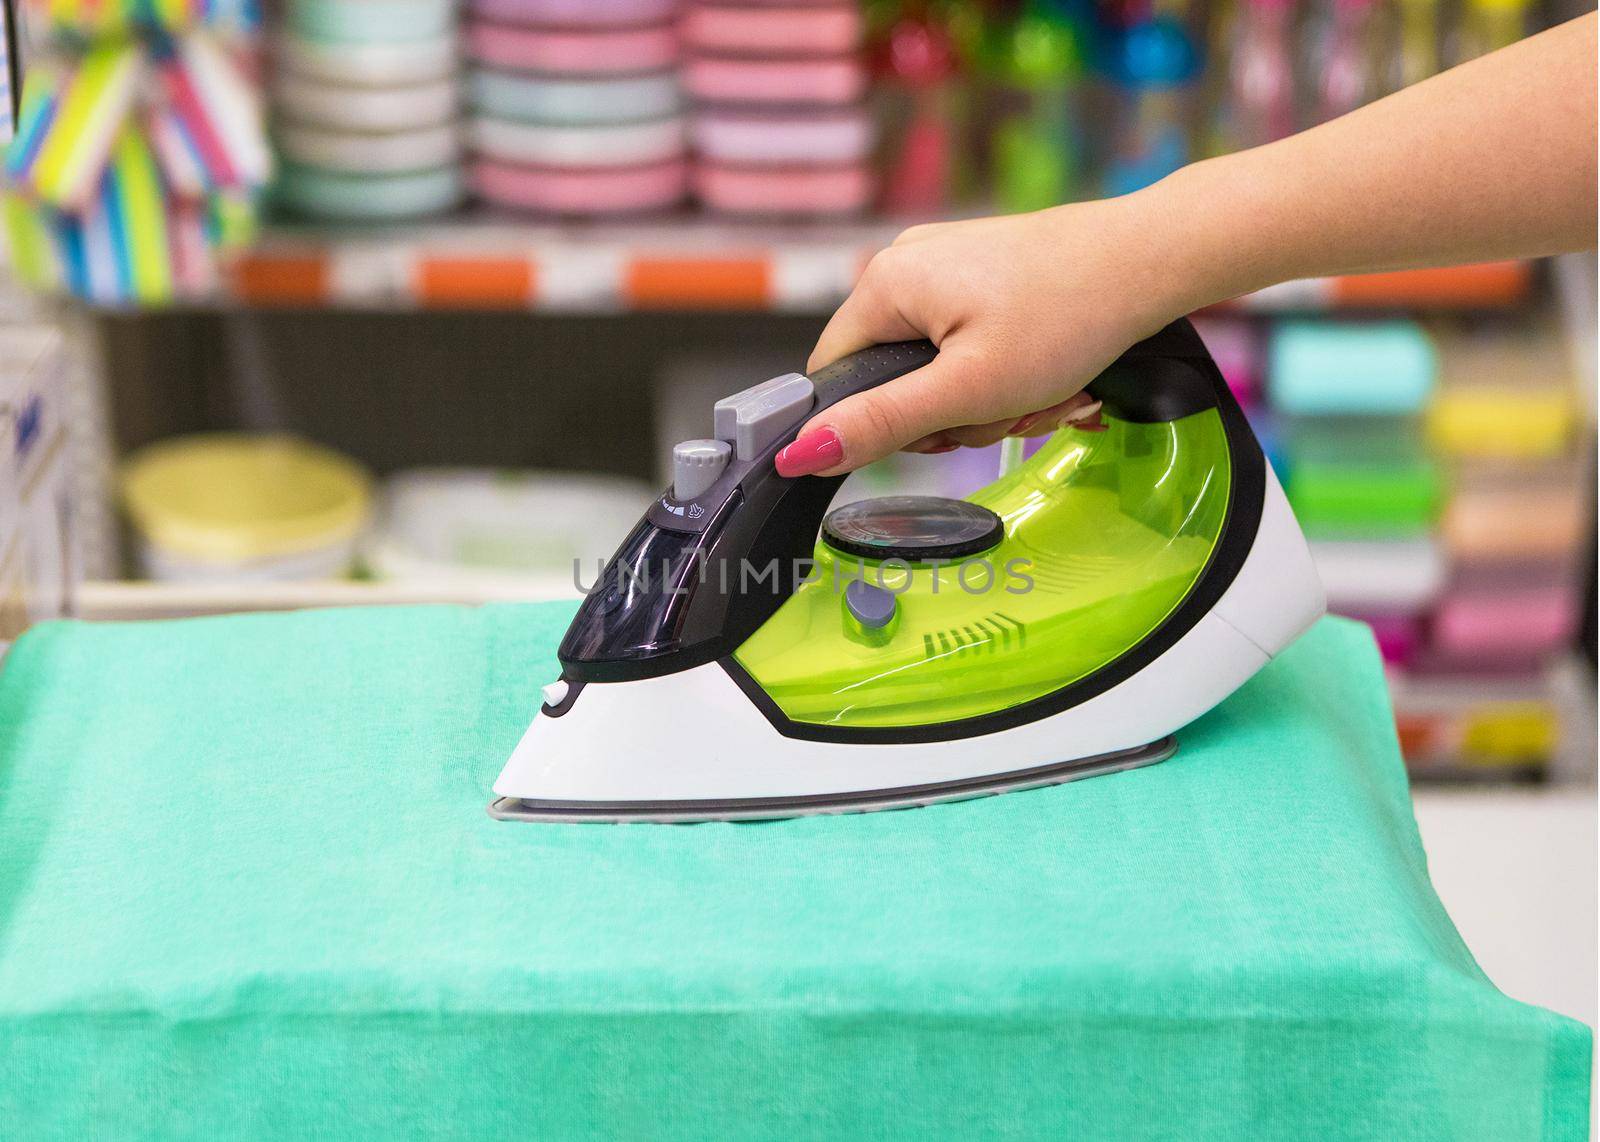 Woman ironing close up at the store by ferhad